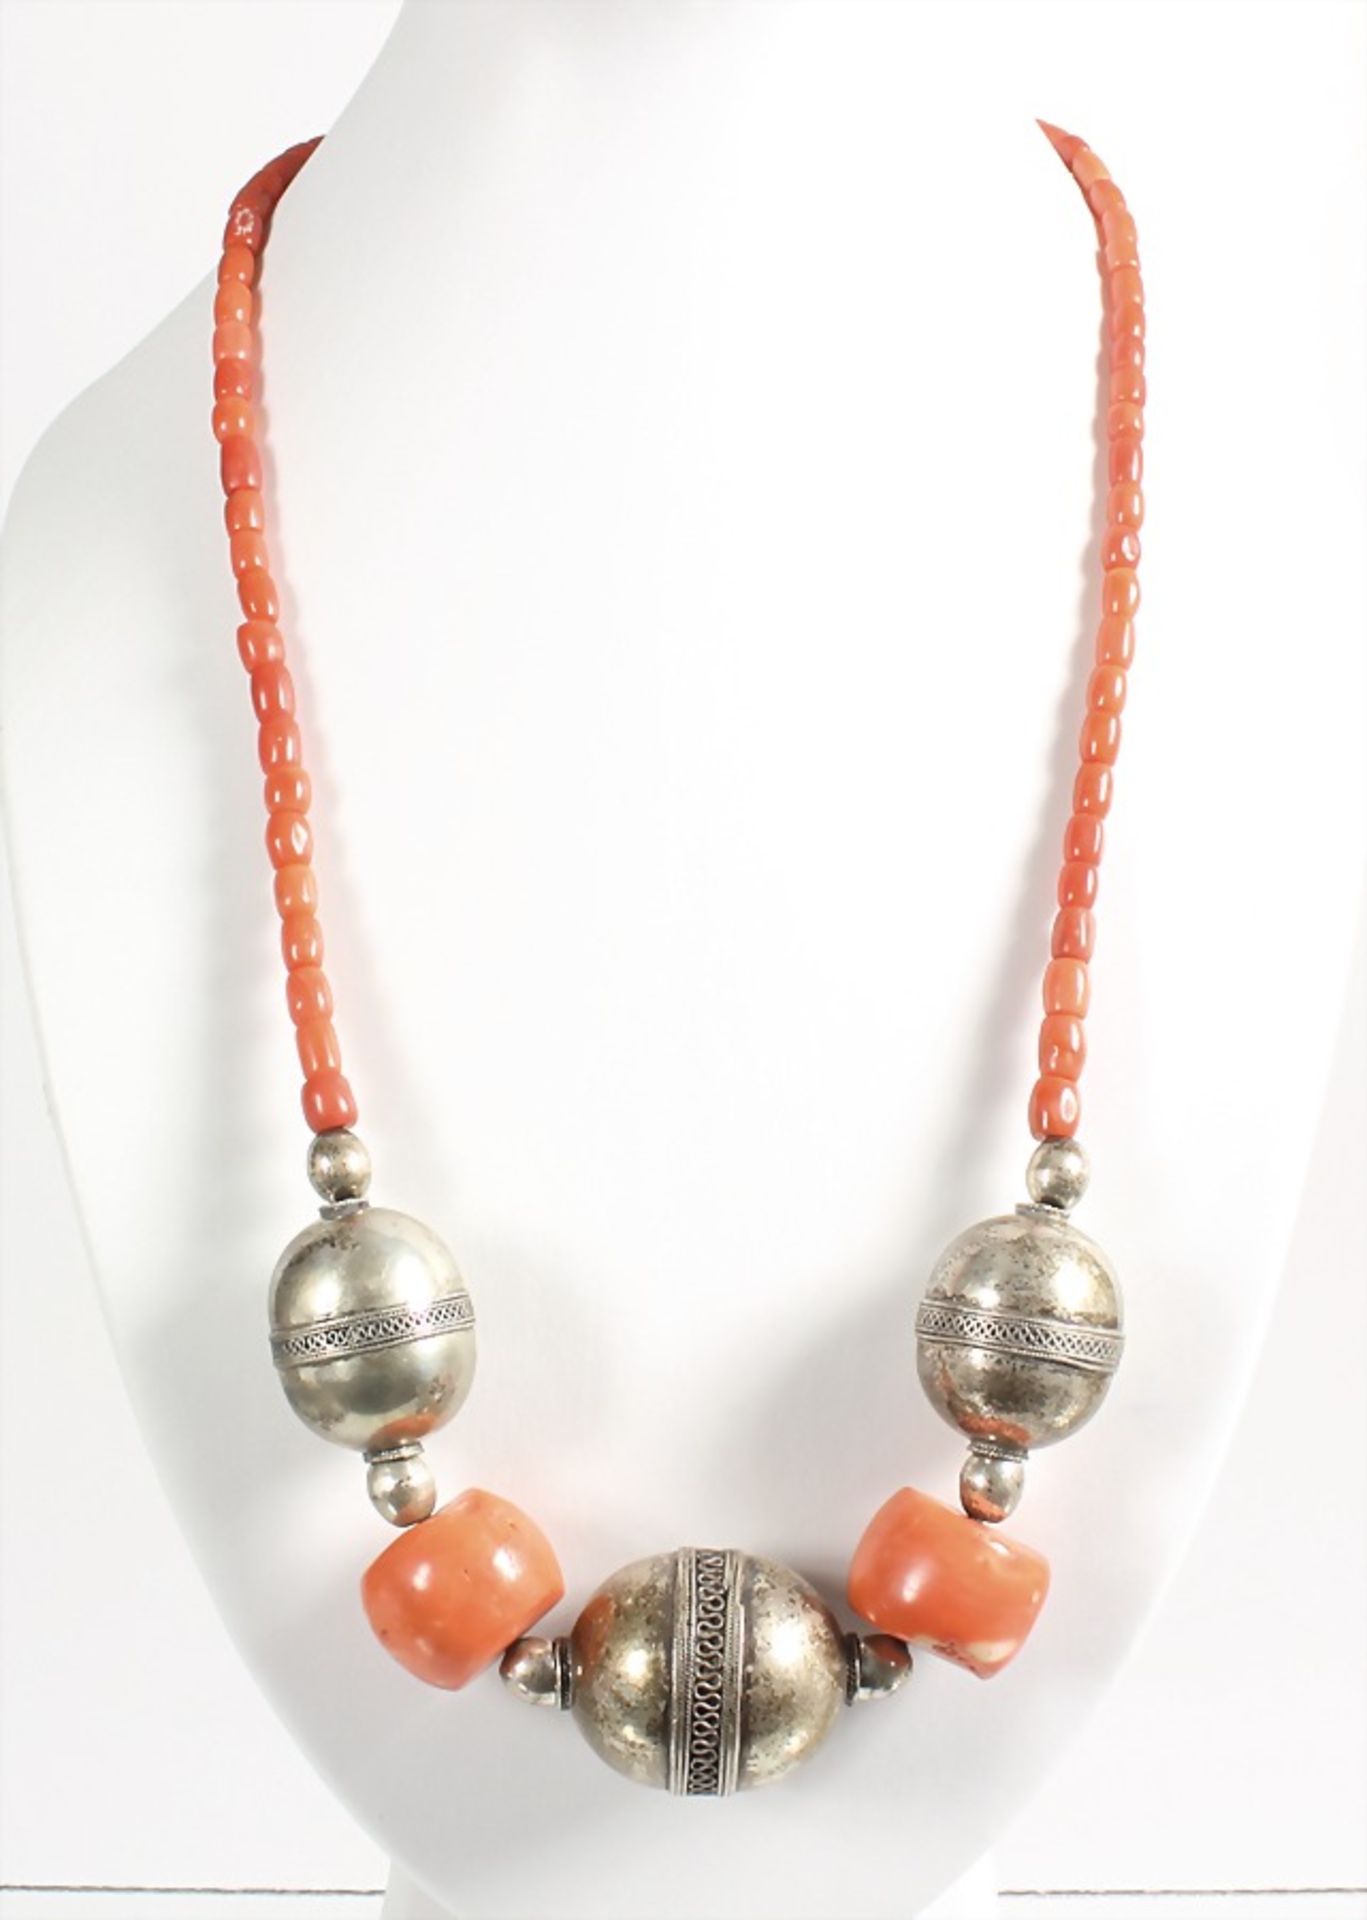 1 corals chain (Berber jewelry probably North Africa), silver, in the front silver olives